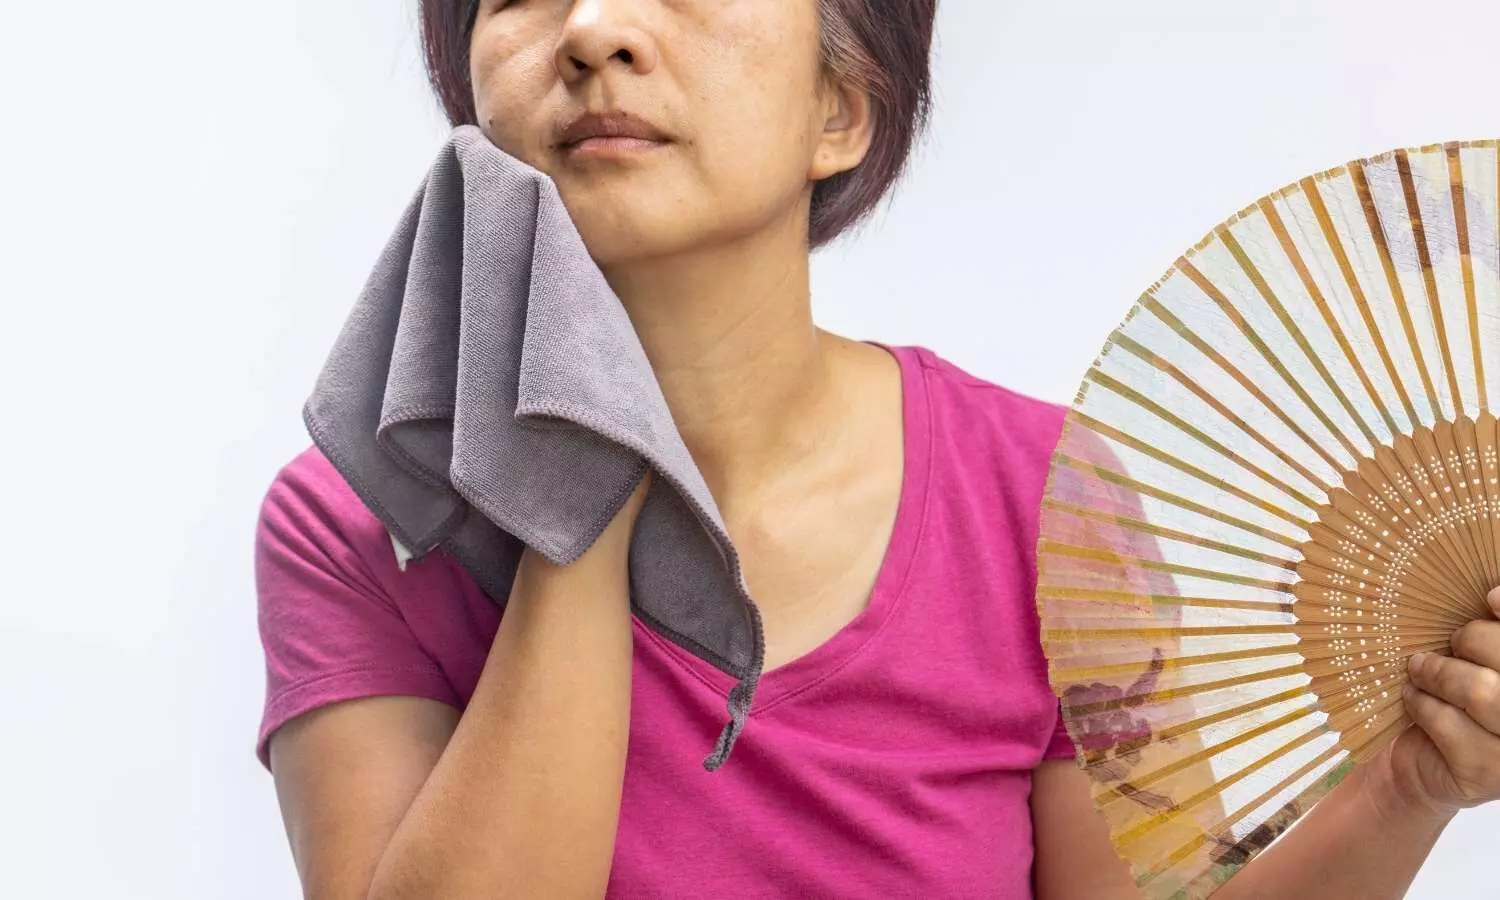 Dietary intervention as good as HRT for reducing menopausal hot flashes